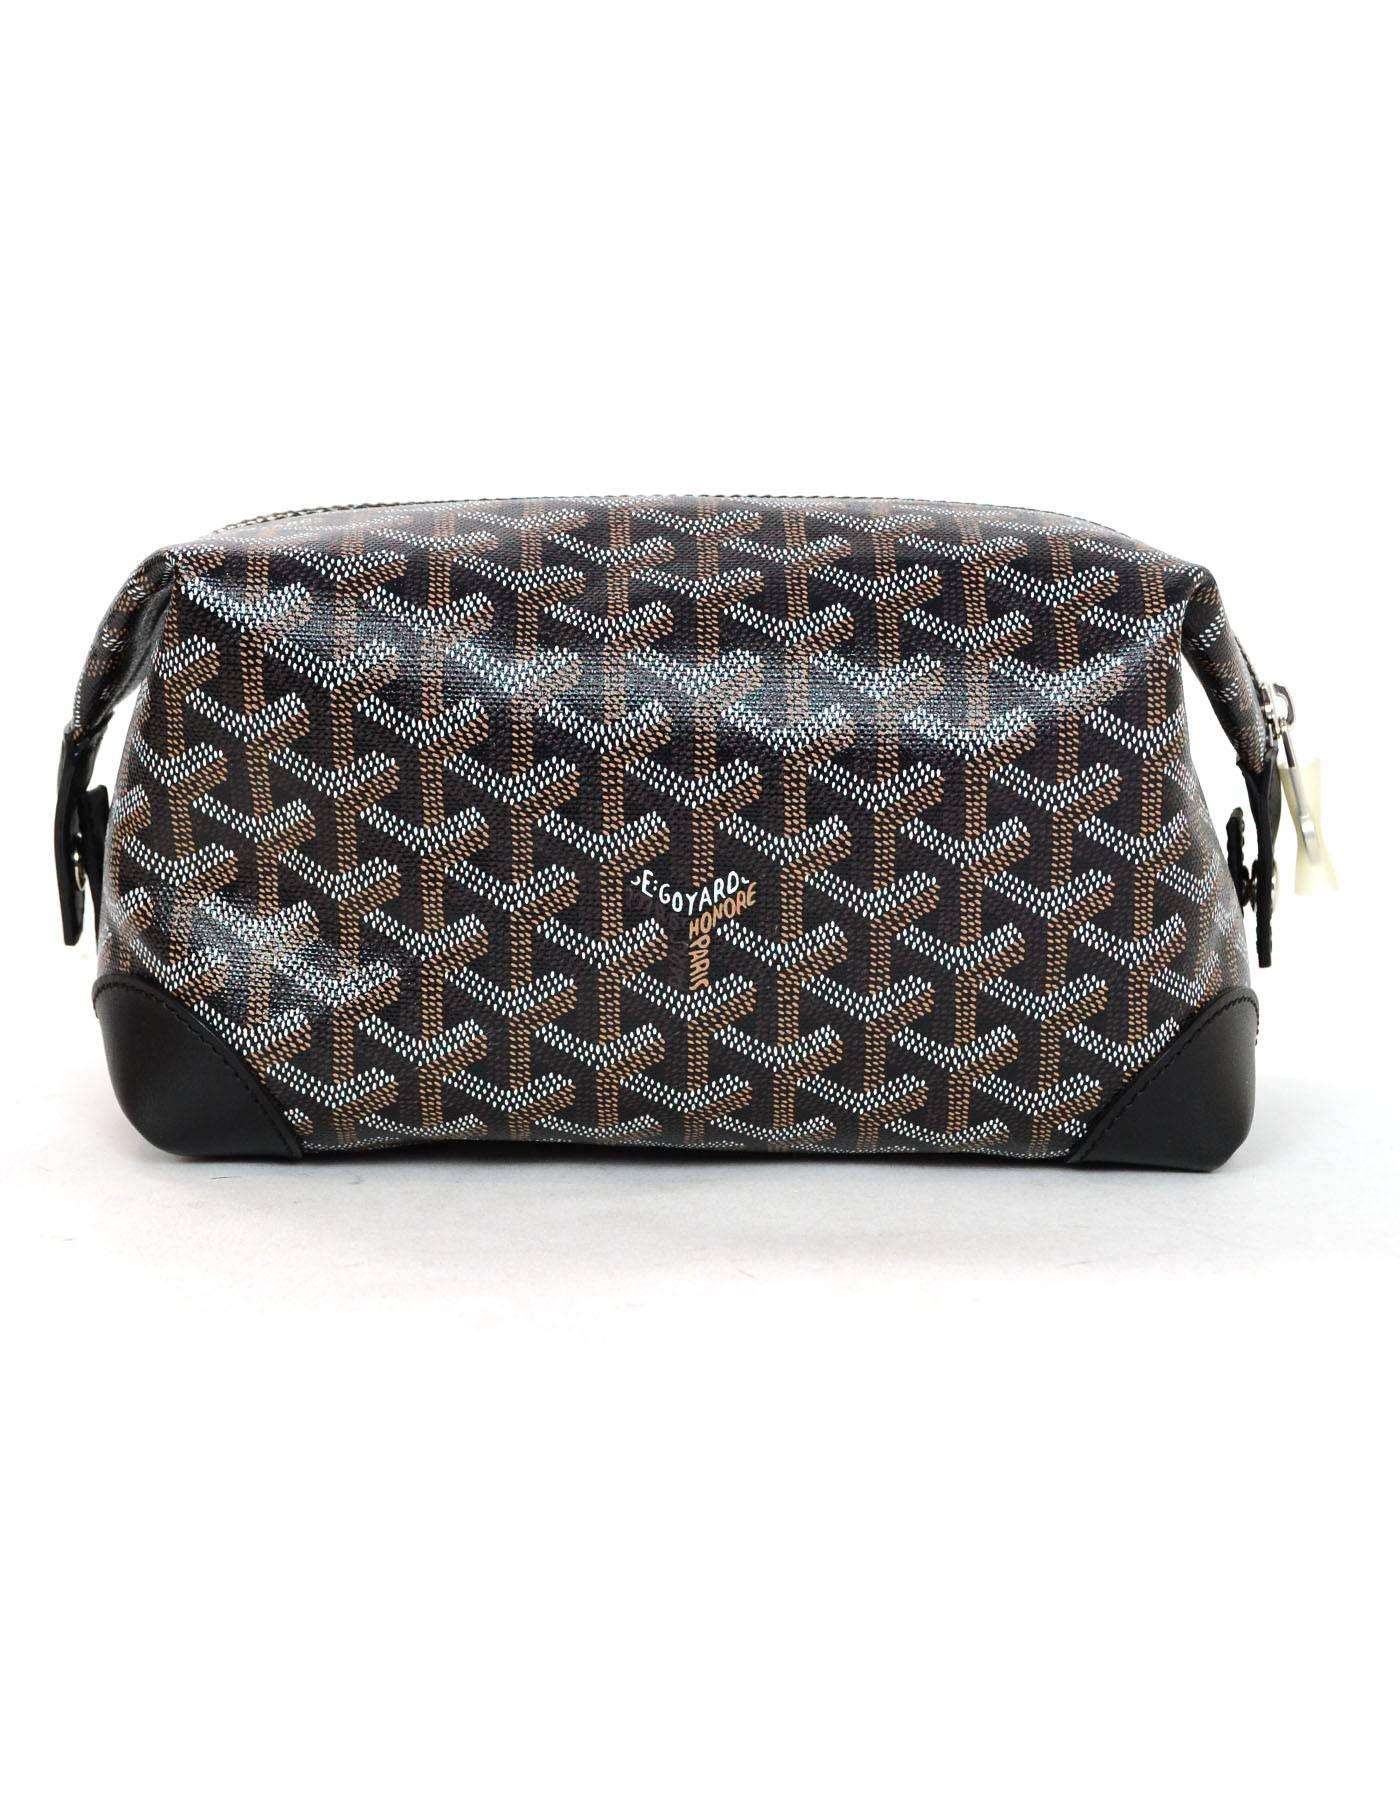 Goyard Black Boeing 25 Trousse de Toilette Cosmetic Travel Case

Made In: Italy
Color: Black
Hardware: Silvertone
Materials: Coated canvas, leather
Lining: Yellow textile
Closure/Opening: Zip top
Exterior Pockets: None
Interior Pockets: Two wall